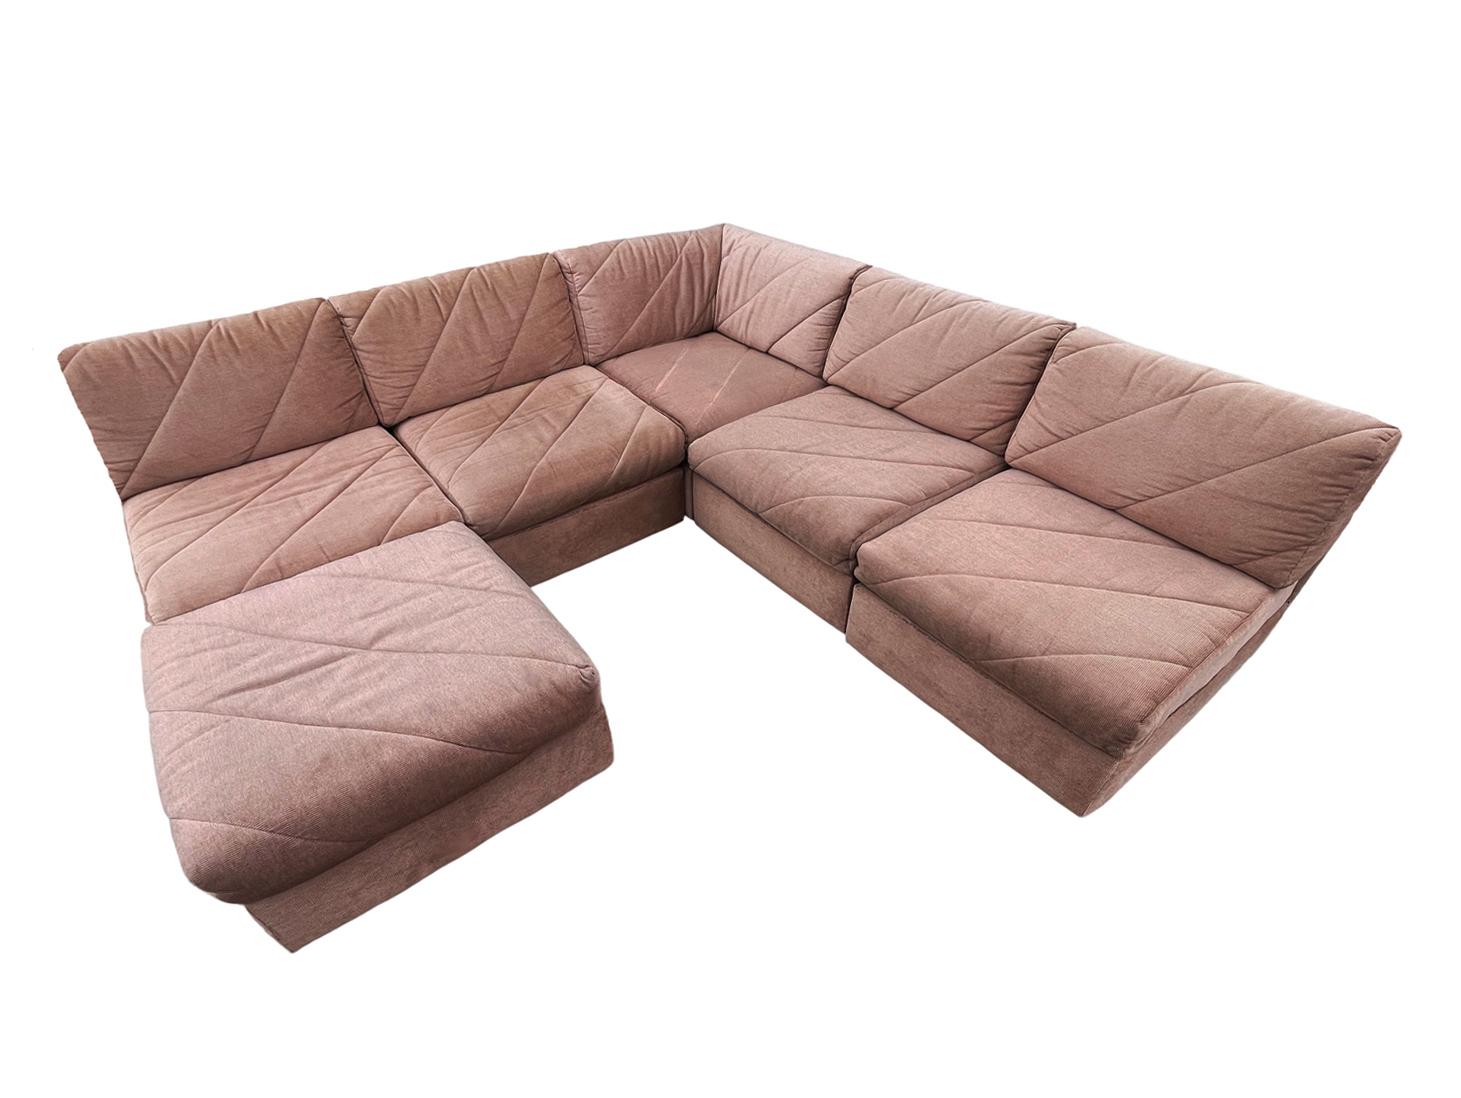 Six Piece Mid Century Boxy Modern Modular or Sectional L Shaped Sofa In Good Condition For Sale In Philadelphia, PA